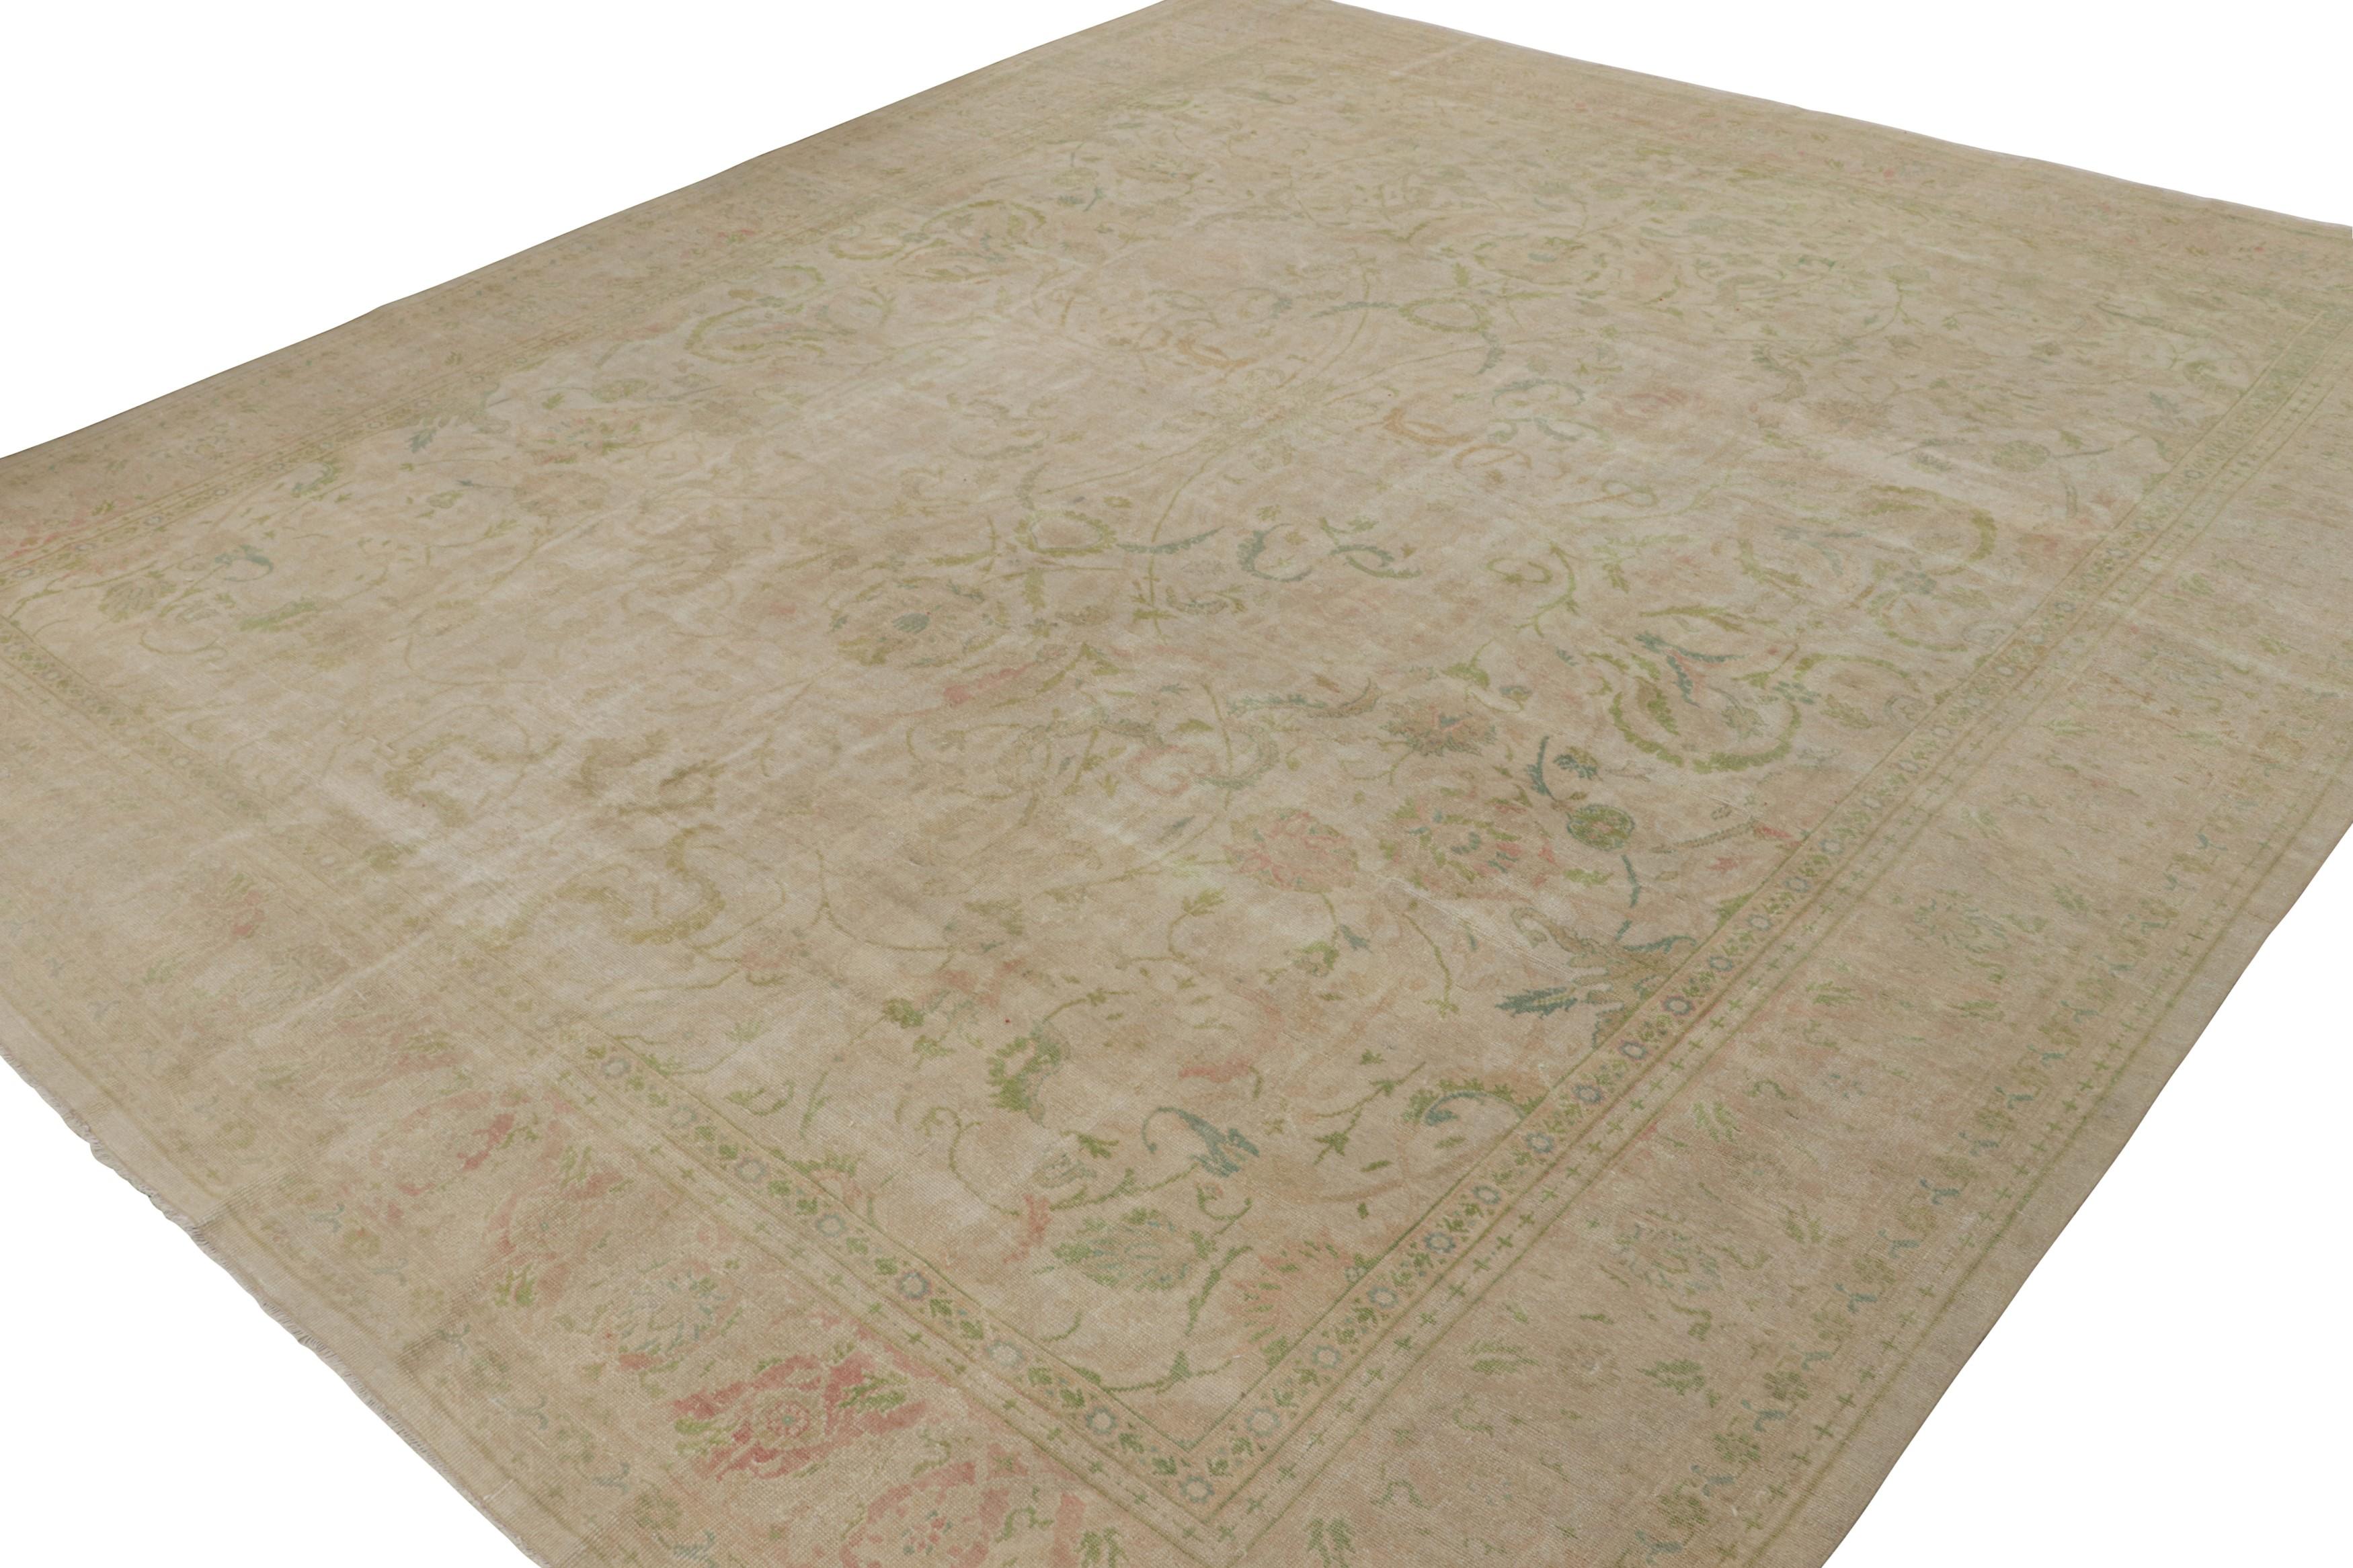 Hand-knotted in wool, this 12x14 antique Sivas rug, originating from Turkey, circa 1920-1930, features pink and green floral patterns with a beige undertone. 

On the Design: 

With similar regal colors as Oushak rugs, this Sivas rug features formal